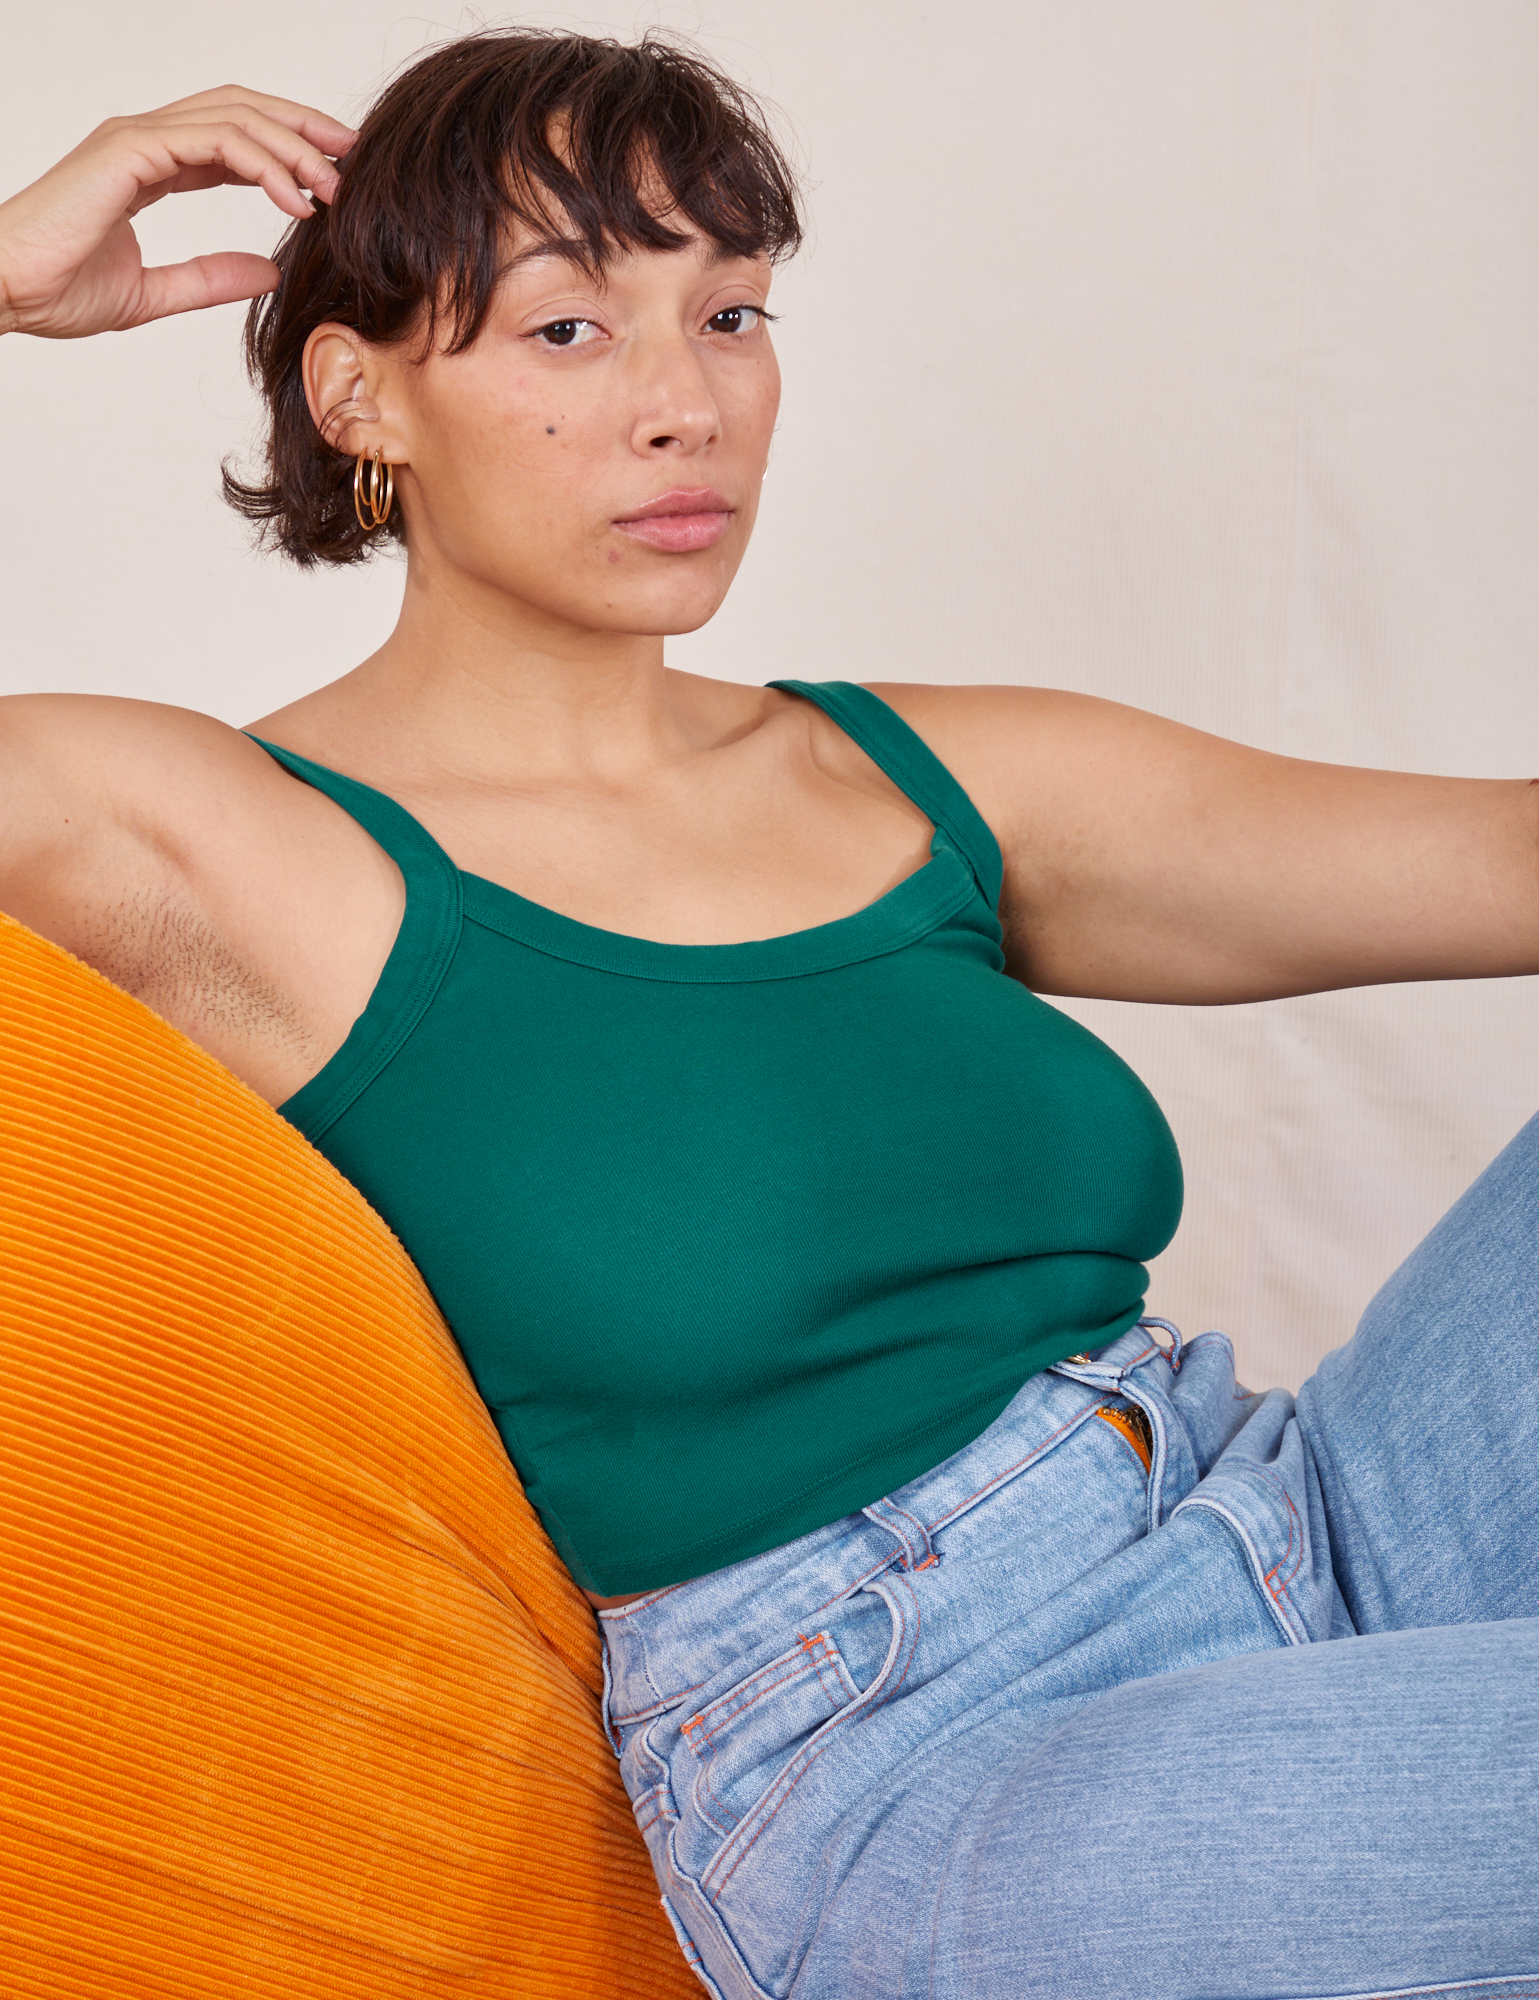 Tiara is sitting on a orange upholstered chair wearing Cropped Cami in Hunter Green and light wash Sailor Jeans